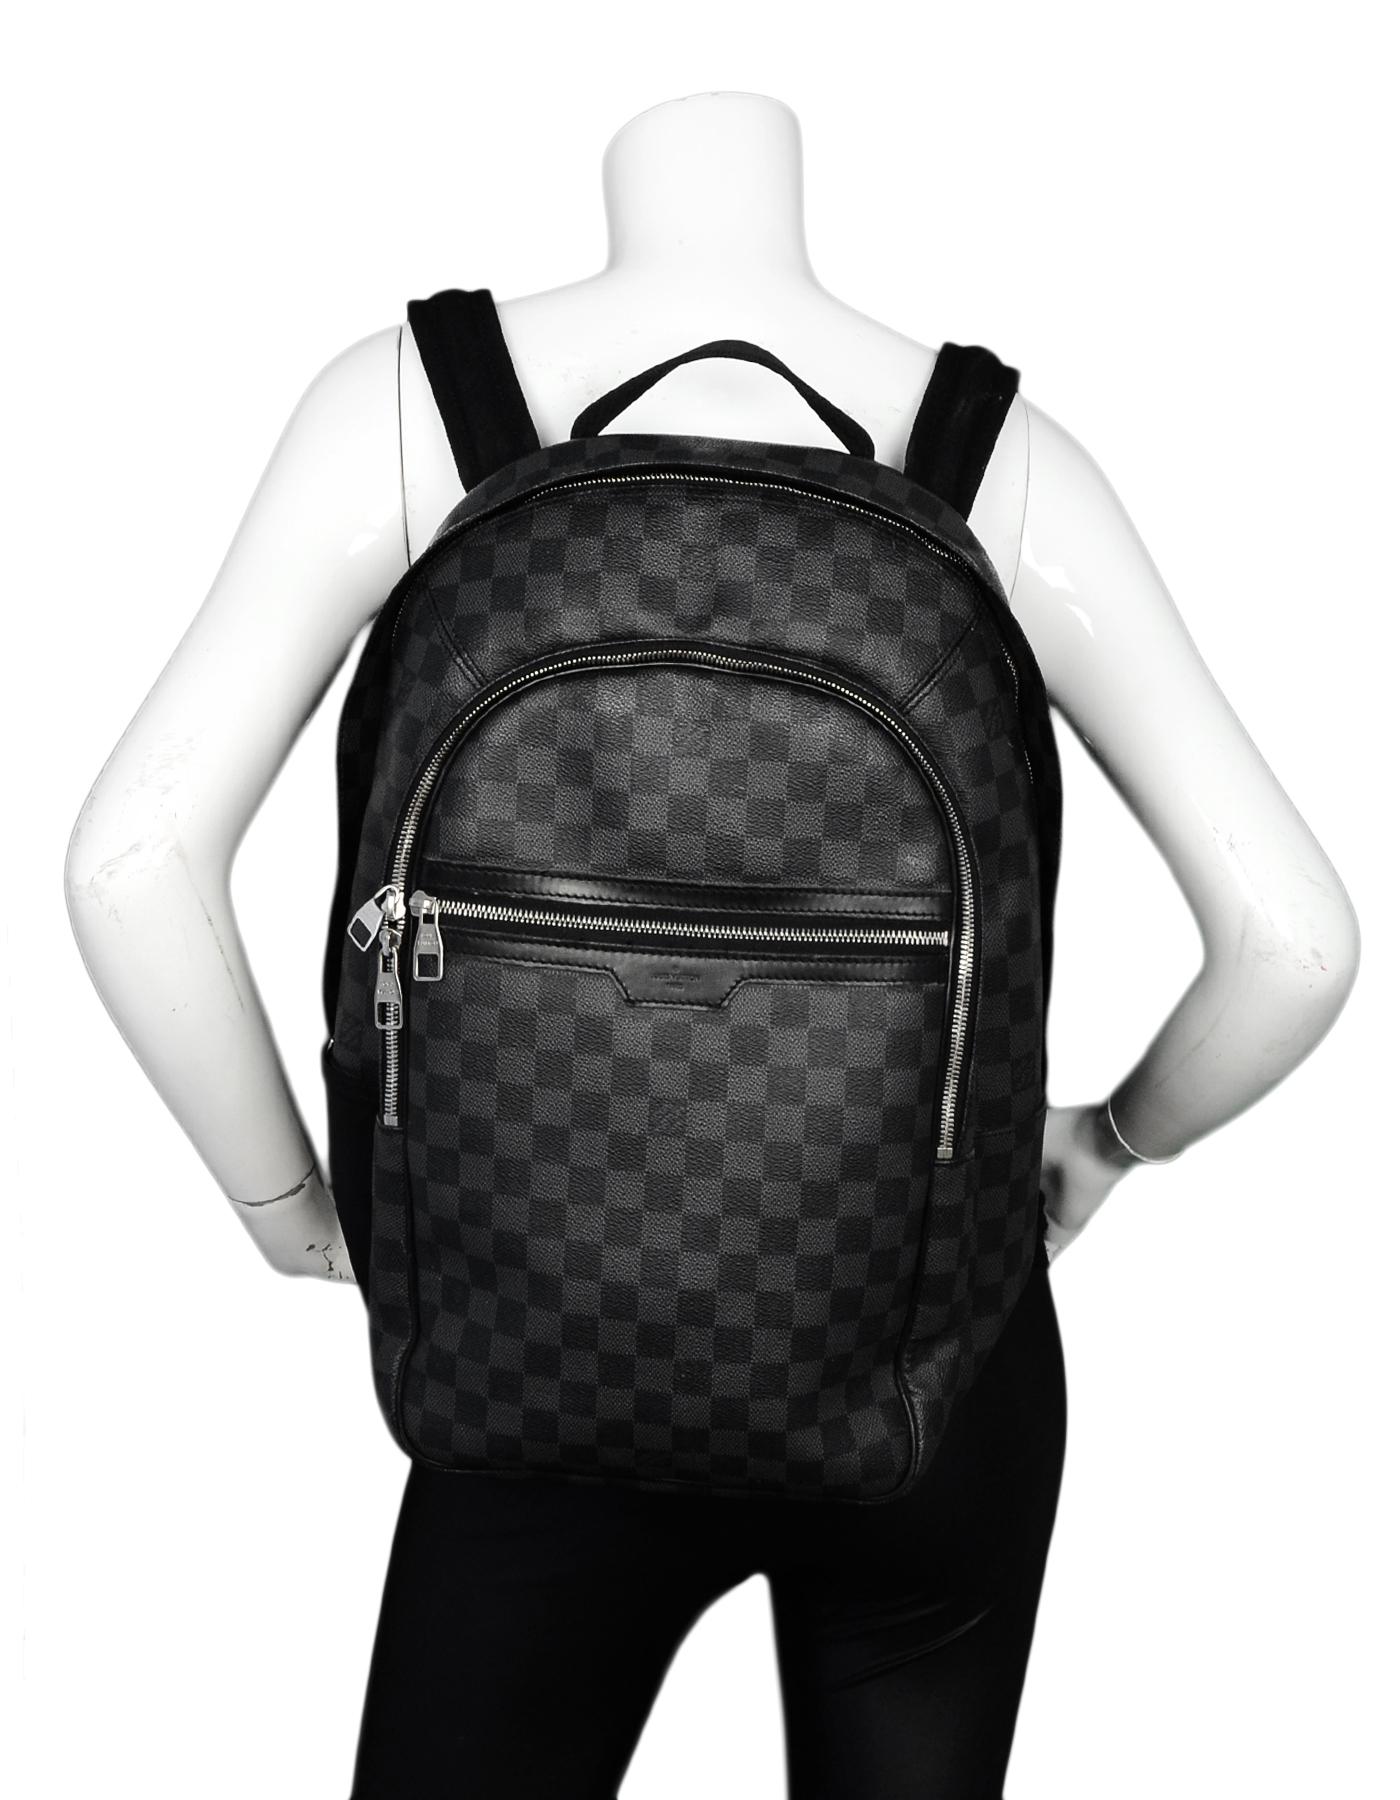 Louis Vuitton Damier Graphite Canvas Unisex Backpack

Made In: France
Year of Production: 2012
Color: Black/grey
Hardware: Silvertone
Materials: Coated canvas, nylon, metal
Lining: Black canvas
Closure/Opening: Zip around
Exterior Pockets: Front